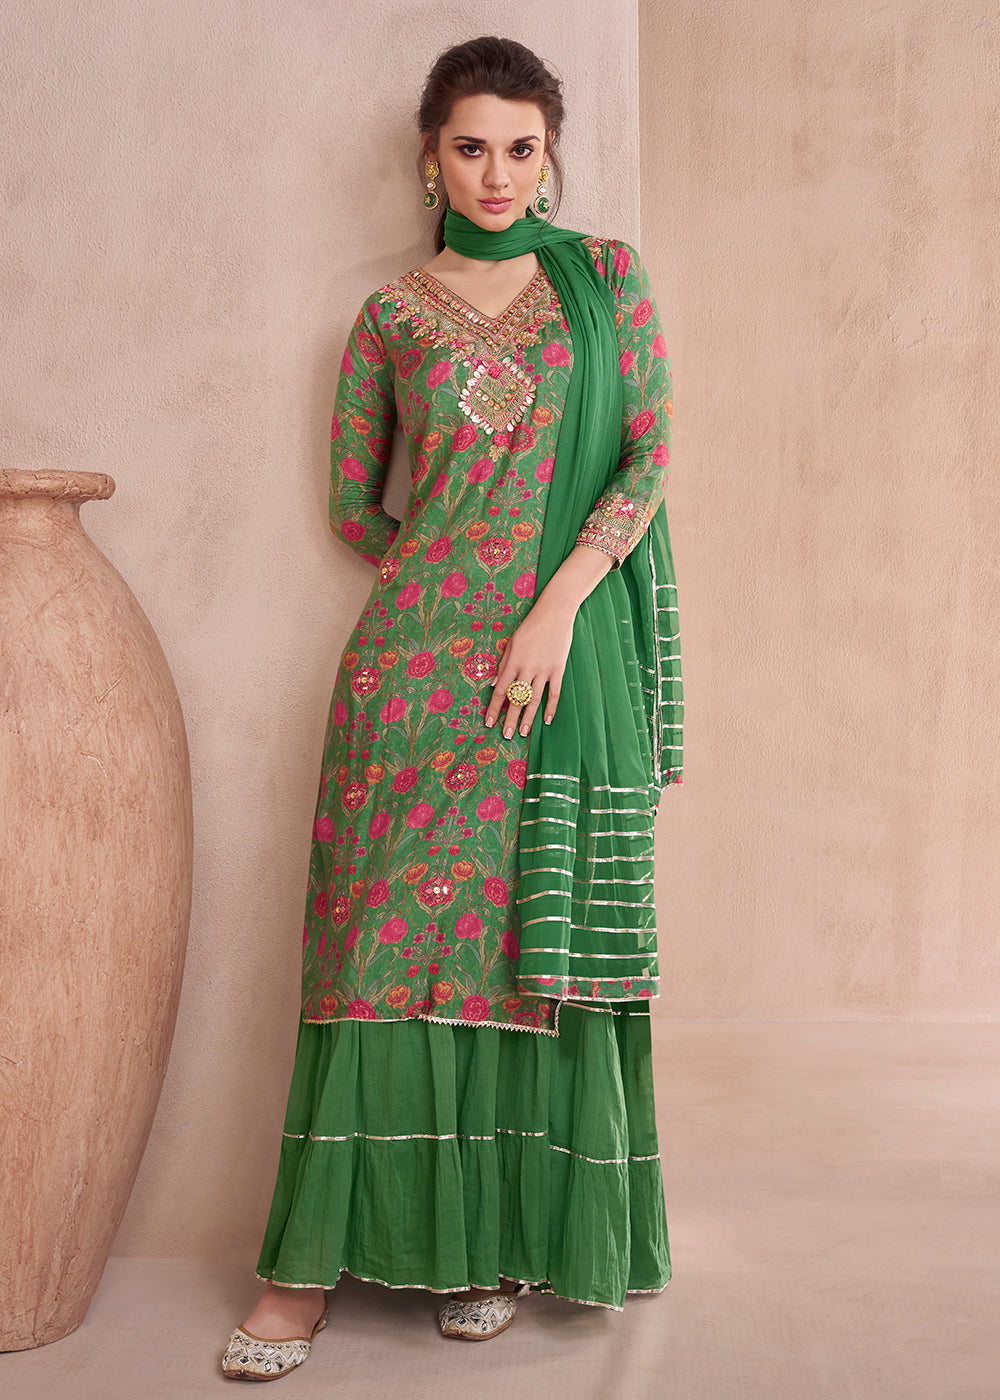 Buy Now Leaf Green Pure Muslin Embroidered Lehenga Skirt Suit Online in USA, UK, Canada, Germany, Australia & Worldwide at Empress Clothing.